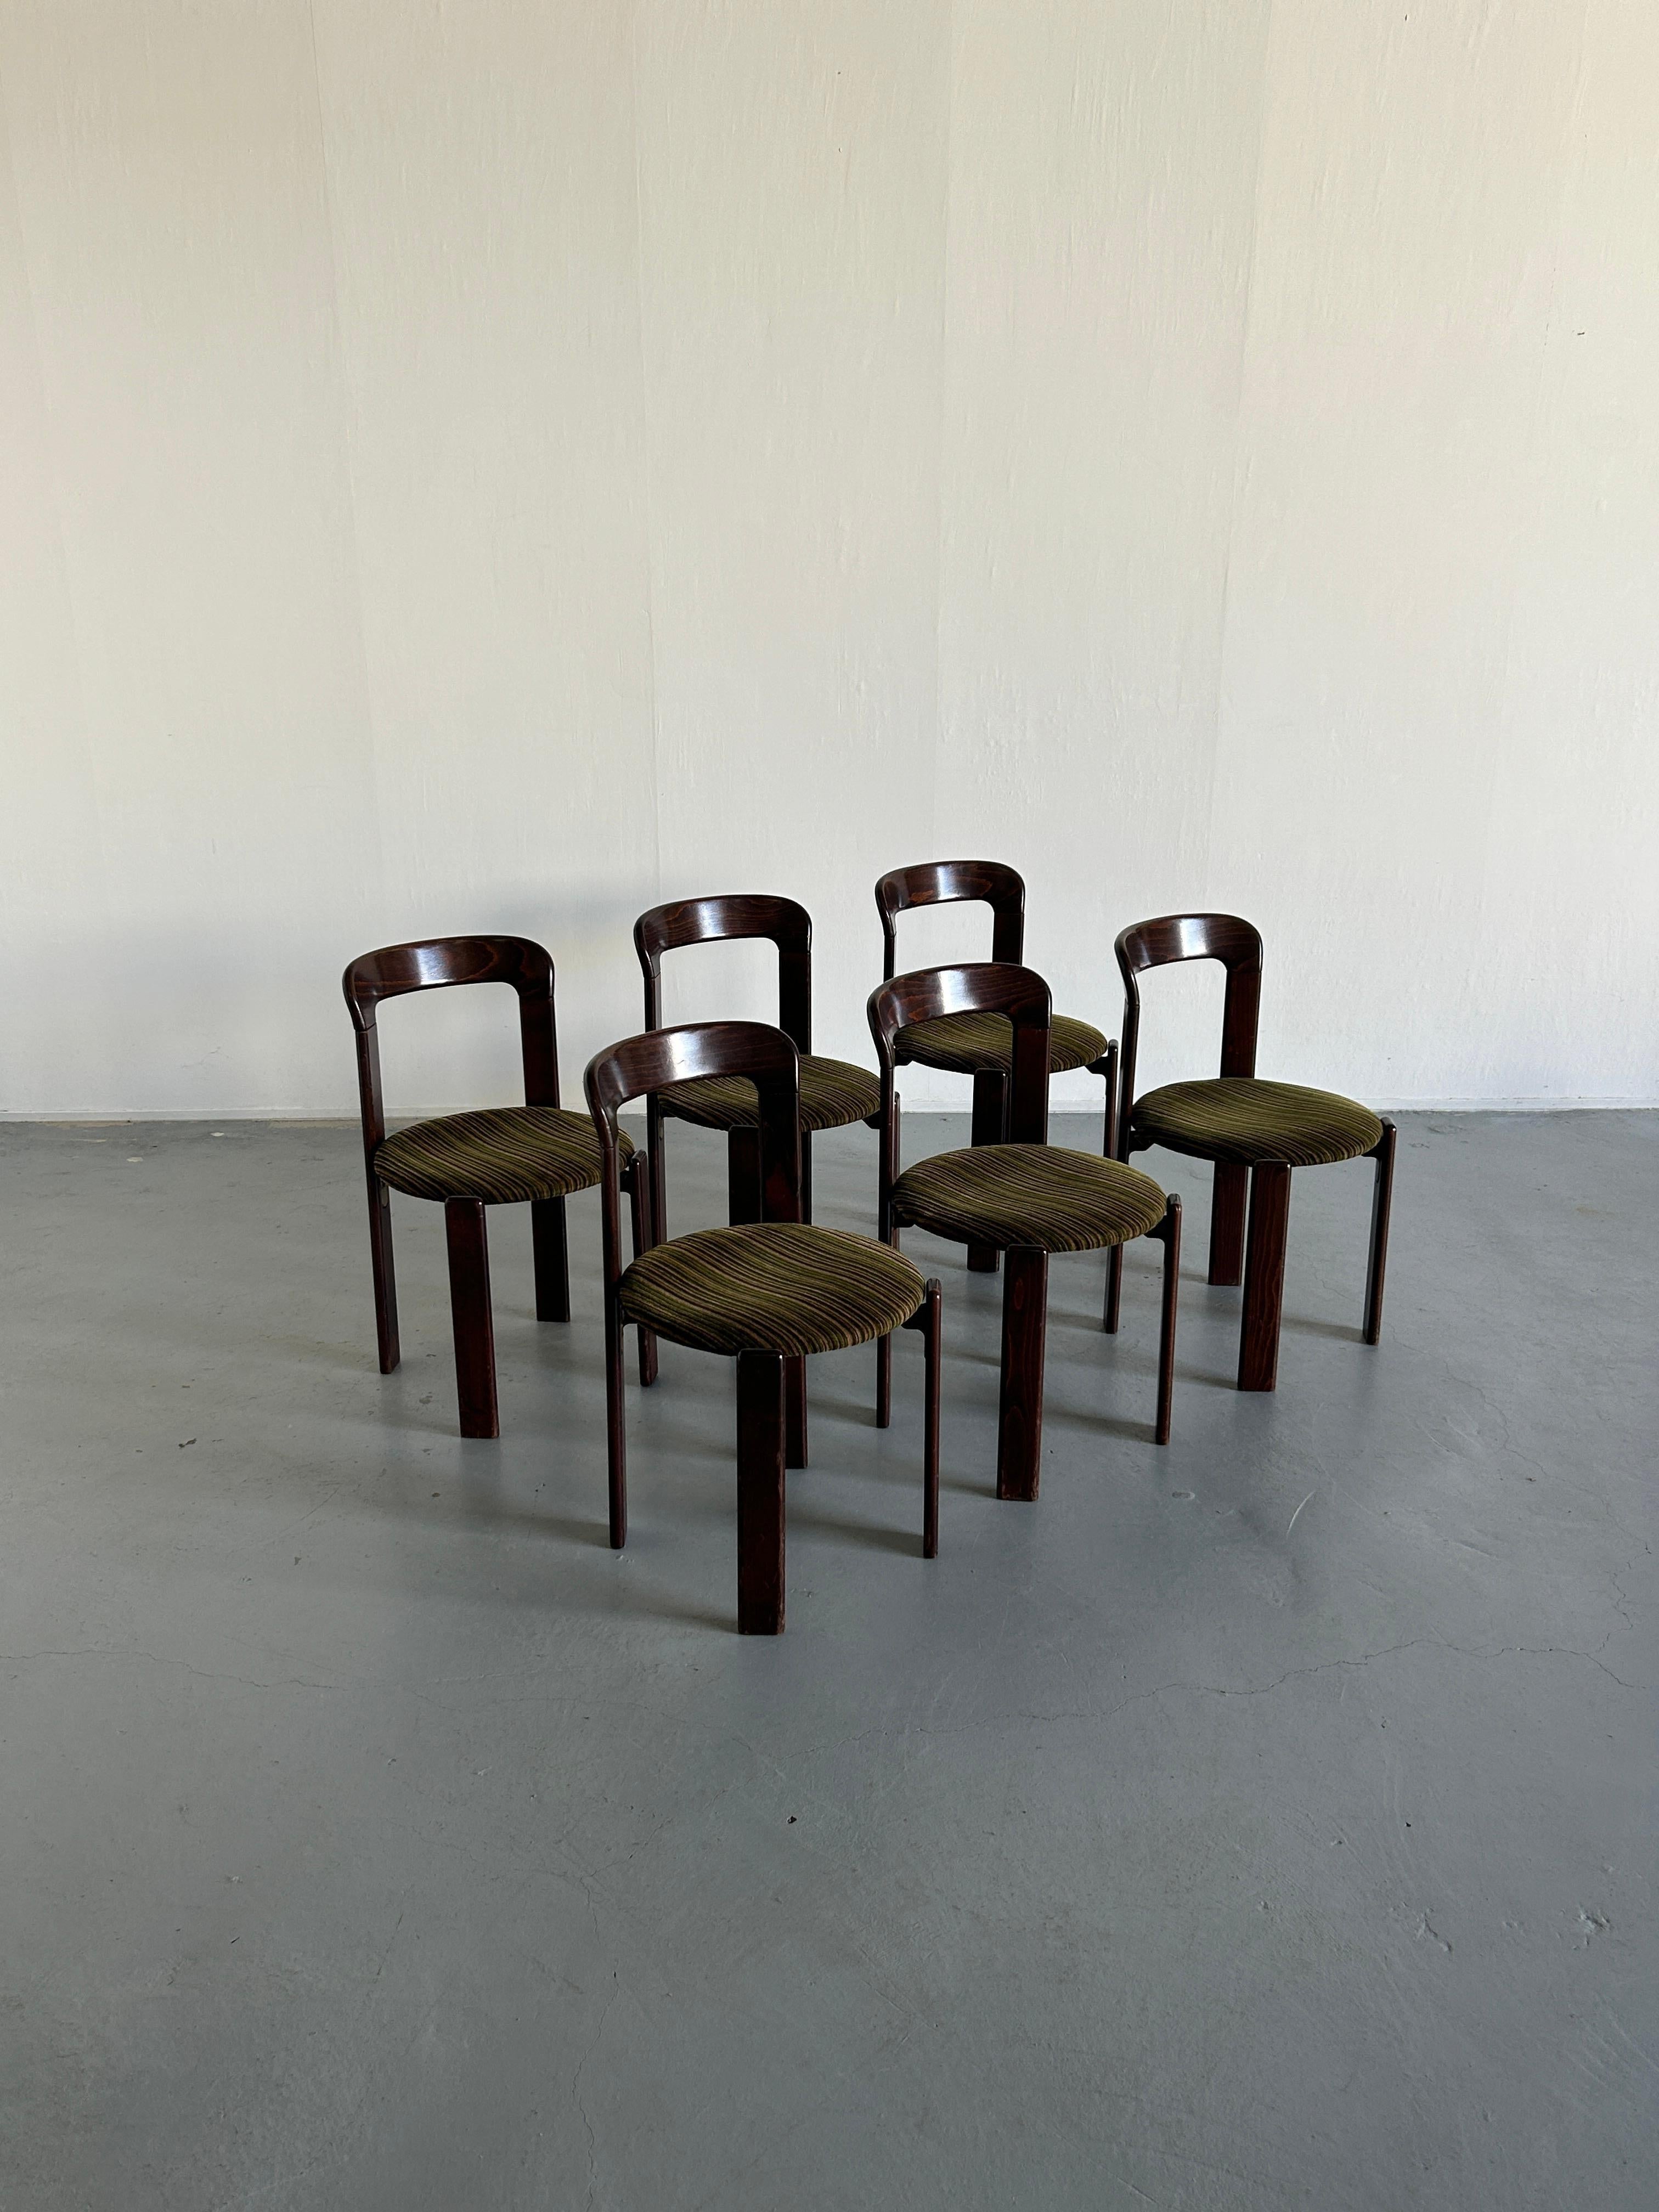 Six Mid-Century-Modern dining chairs designed by Bruno Rey in the 1970s. 
Iconic design, produced by the well known Germany manufacturer Kusch+Co in the early 1980s.
Sourced from the original owners.

The dining chairs were made of solid beech,